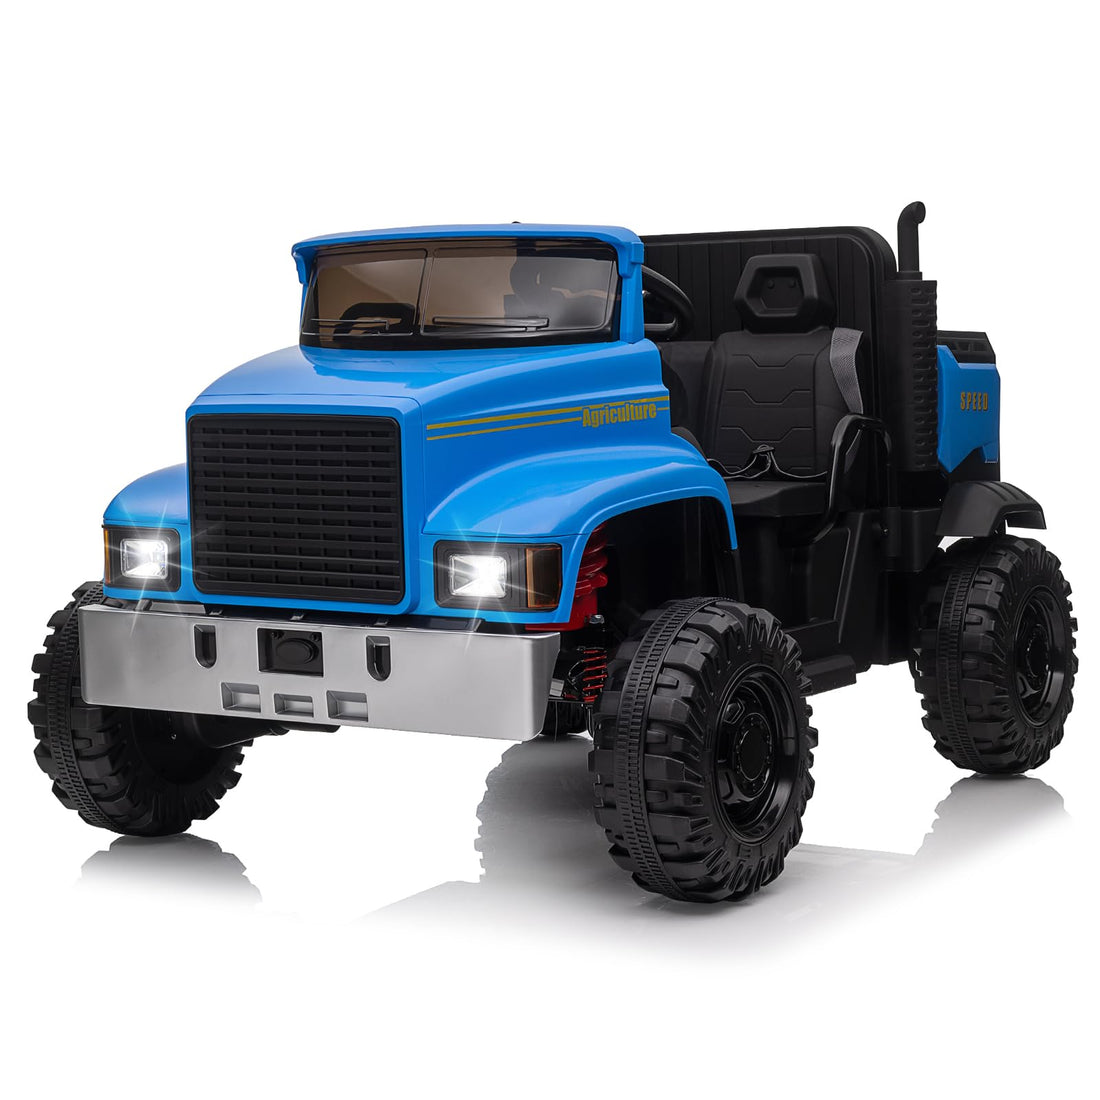 24V Ride On Truck with Remote Control Electric UTV Vehicles with Dump Bed, 4WD Power 4x200W Motors,4xSpring Suspension, 3 Speeds, 2 Seater Kids Ride On Toys Best Gifts for Kids